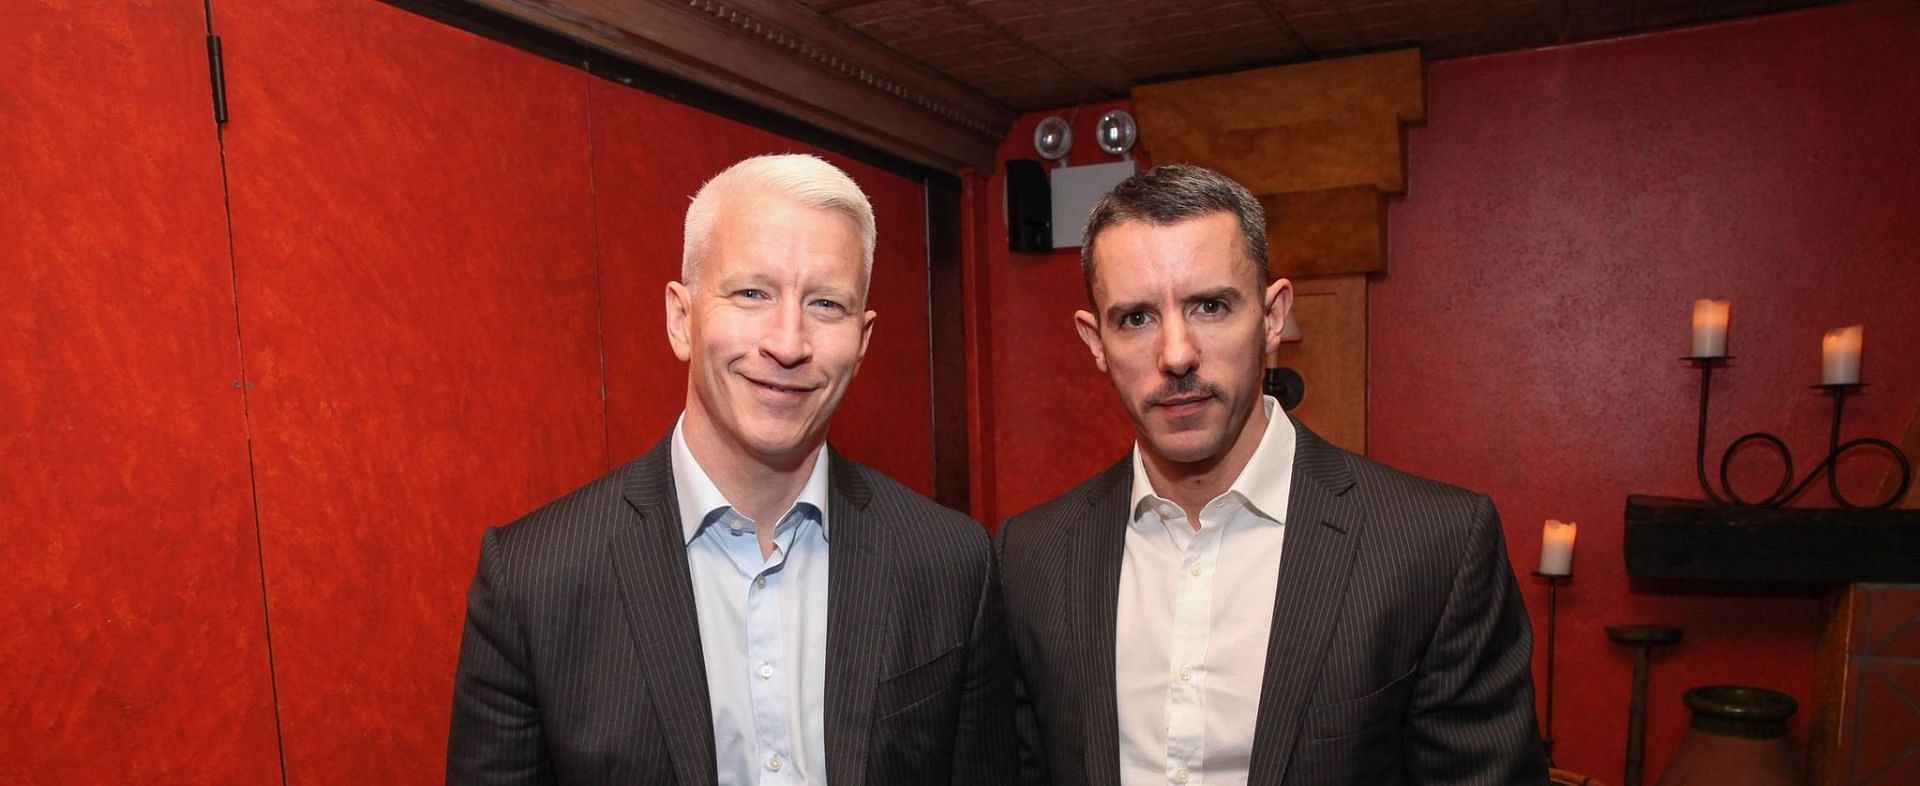 Benjamin Maisani is a French-American businessman and the former partner of Anderson Cooper (Image via Rob Kim/Getty Images)